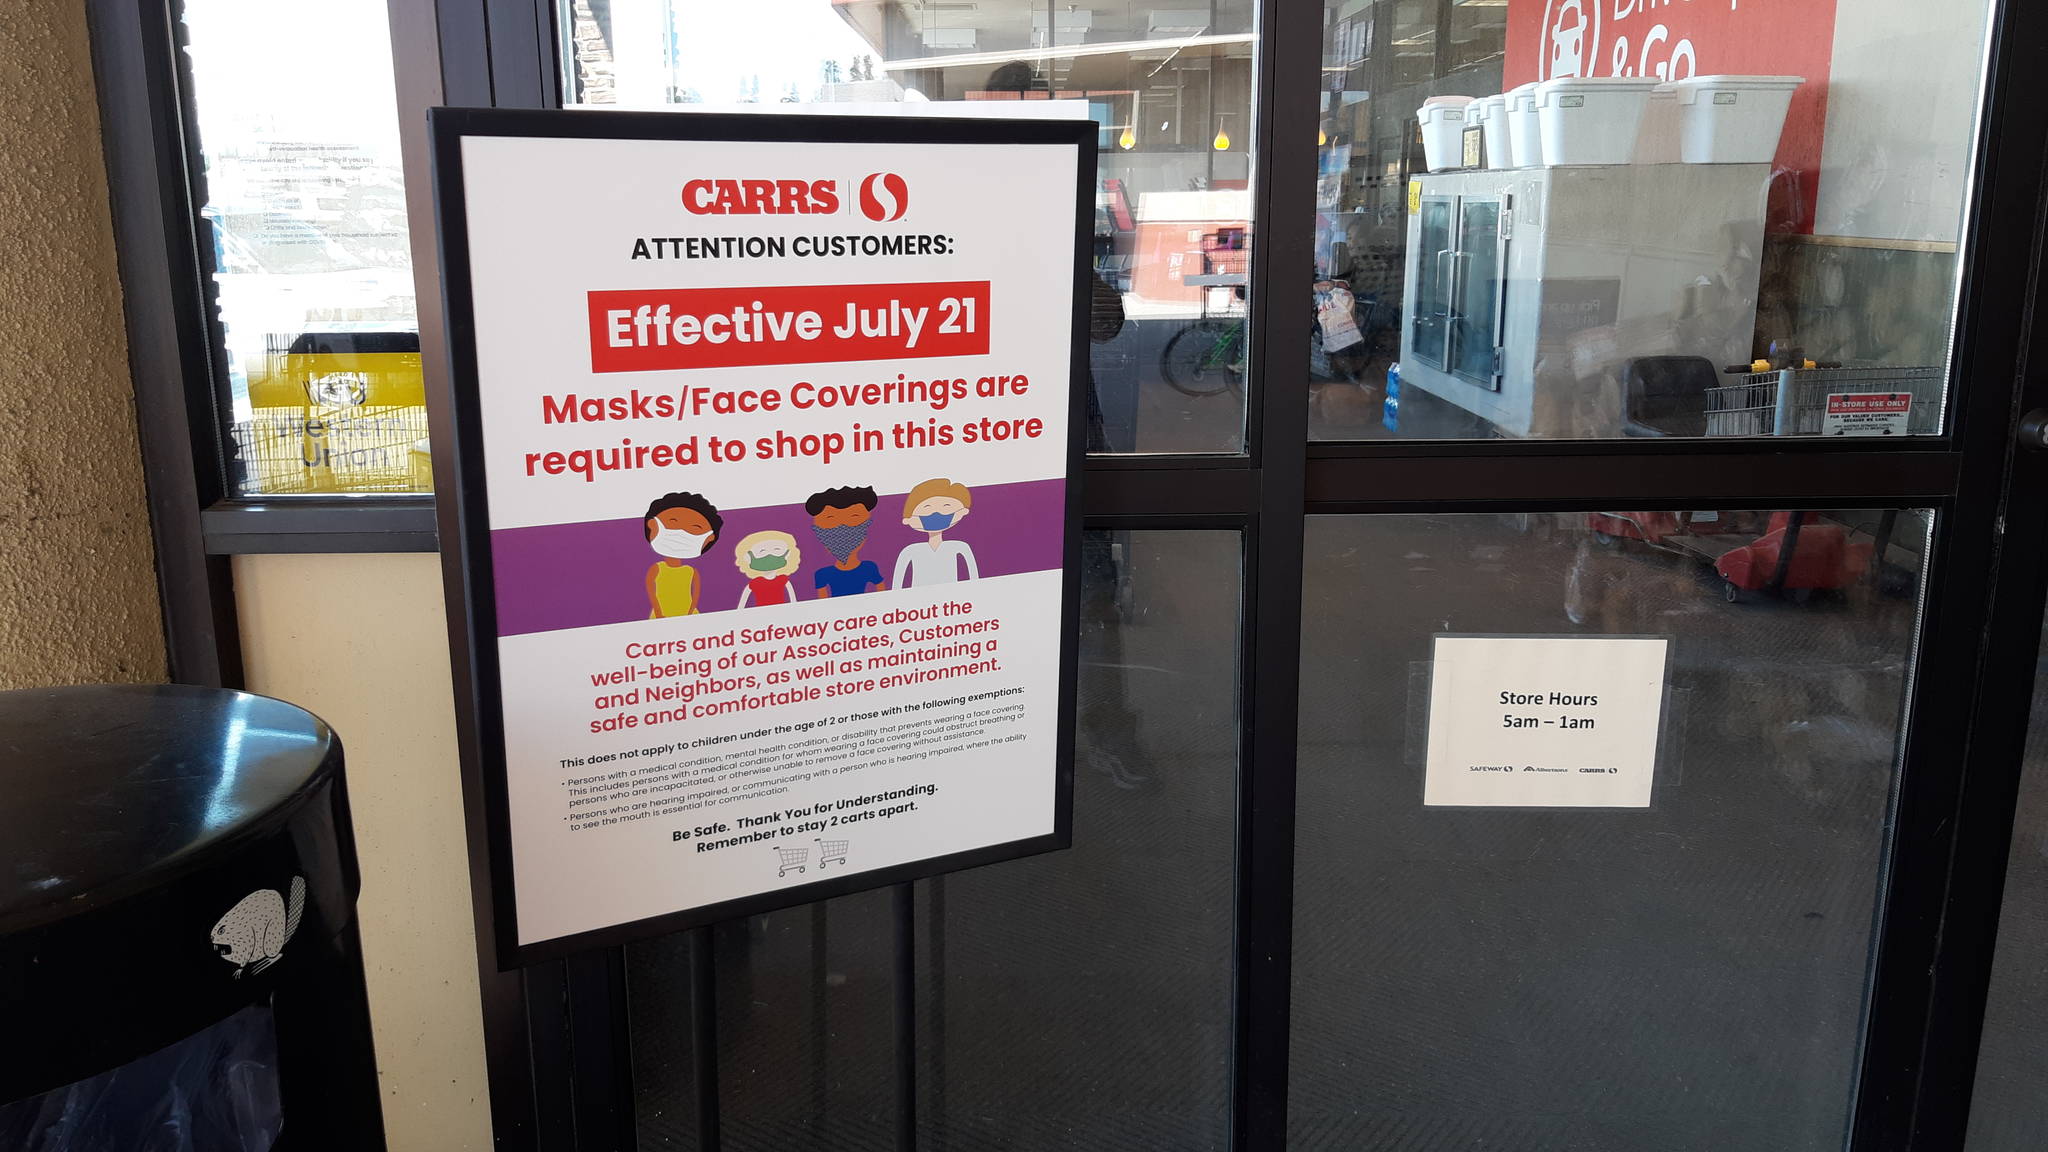 A sign detailing the store’s mask policy is seen here outside Safeway in Soldotna on July 21, 2020. (Photo by Brian Mazurek/Peninsula Clarion)